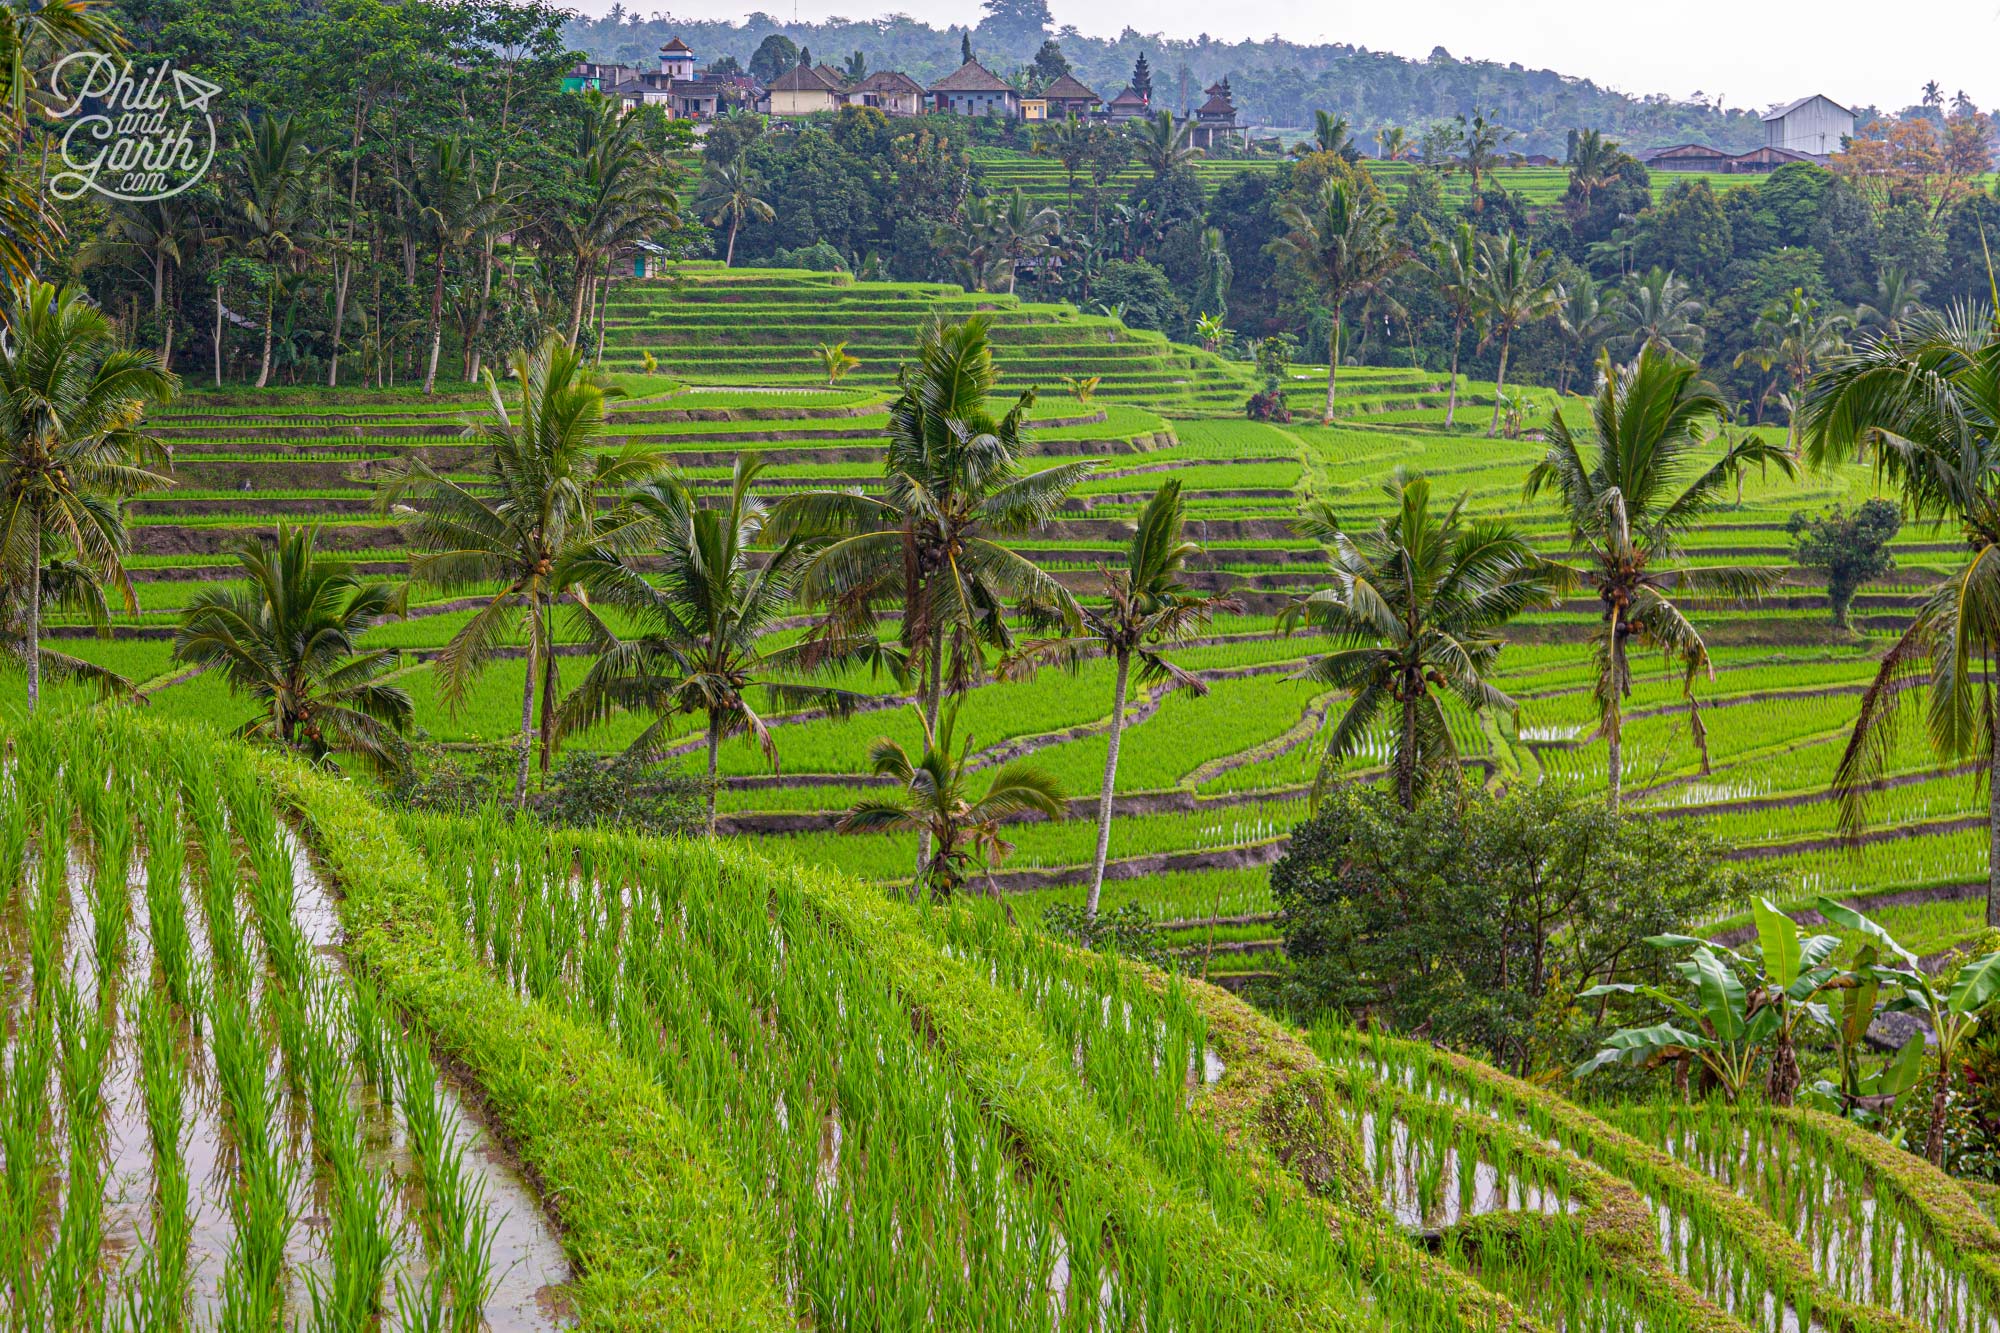 Jatiluwih Rice Terraces are UNESCO listed situated in the north west of the island - 2 hours from Ubud